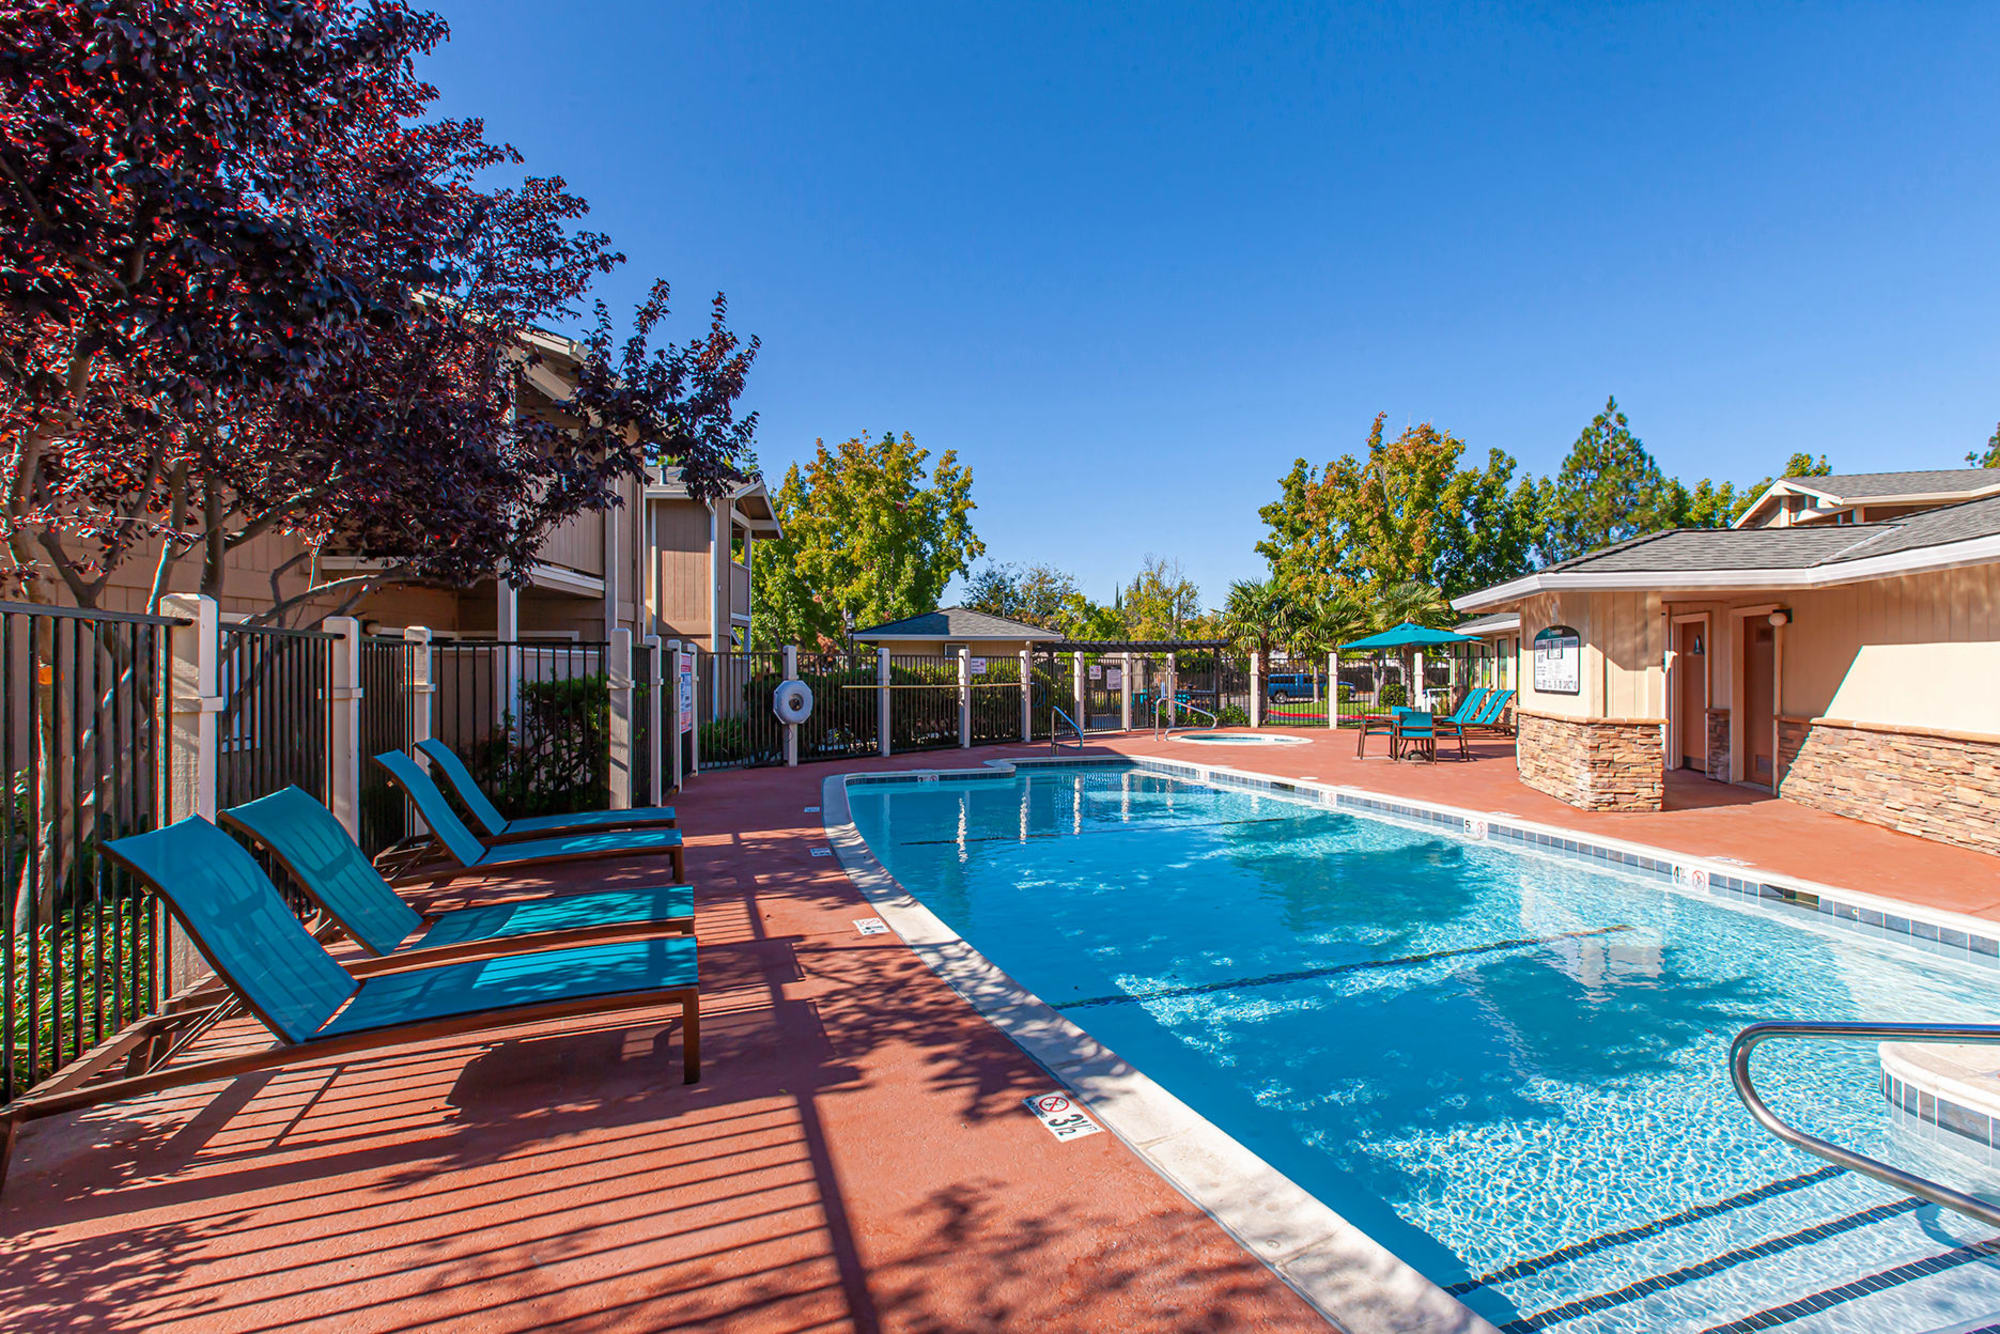 Swimming Pool with lounge Chairs at Sommerset Apartments in Vacaville, CA